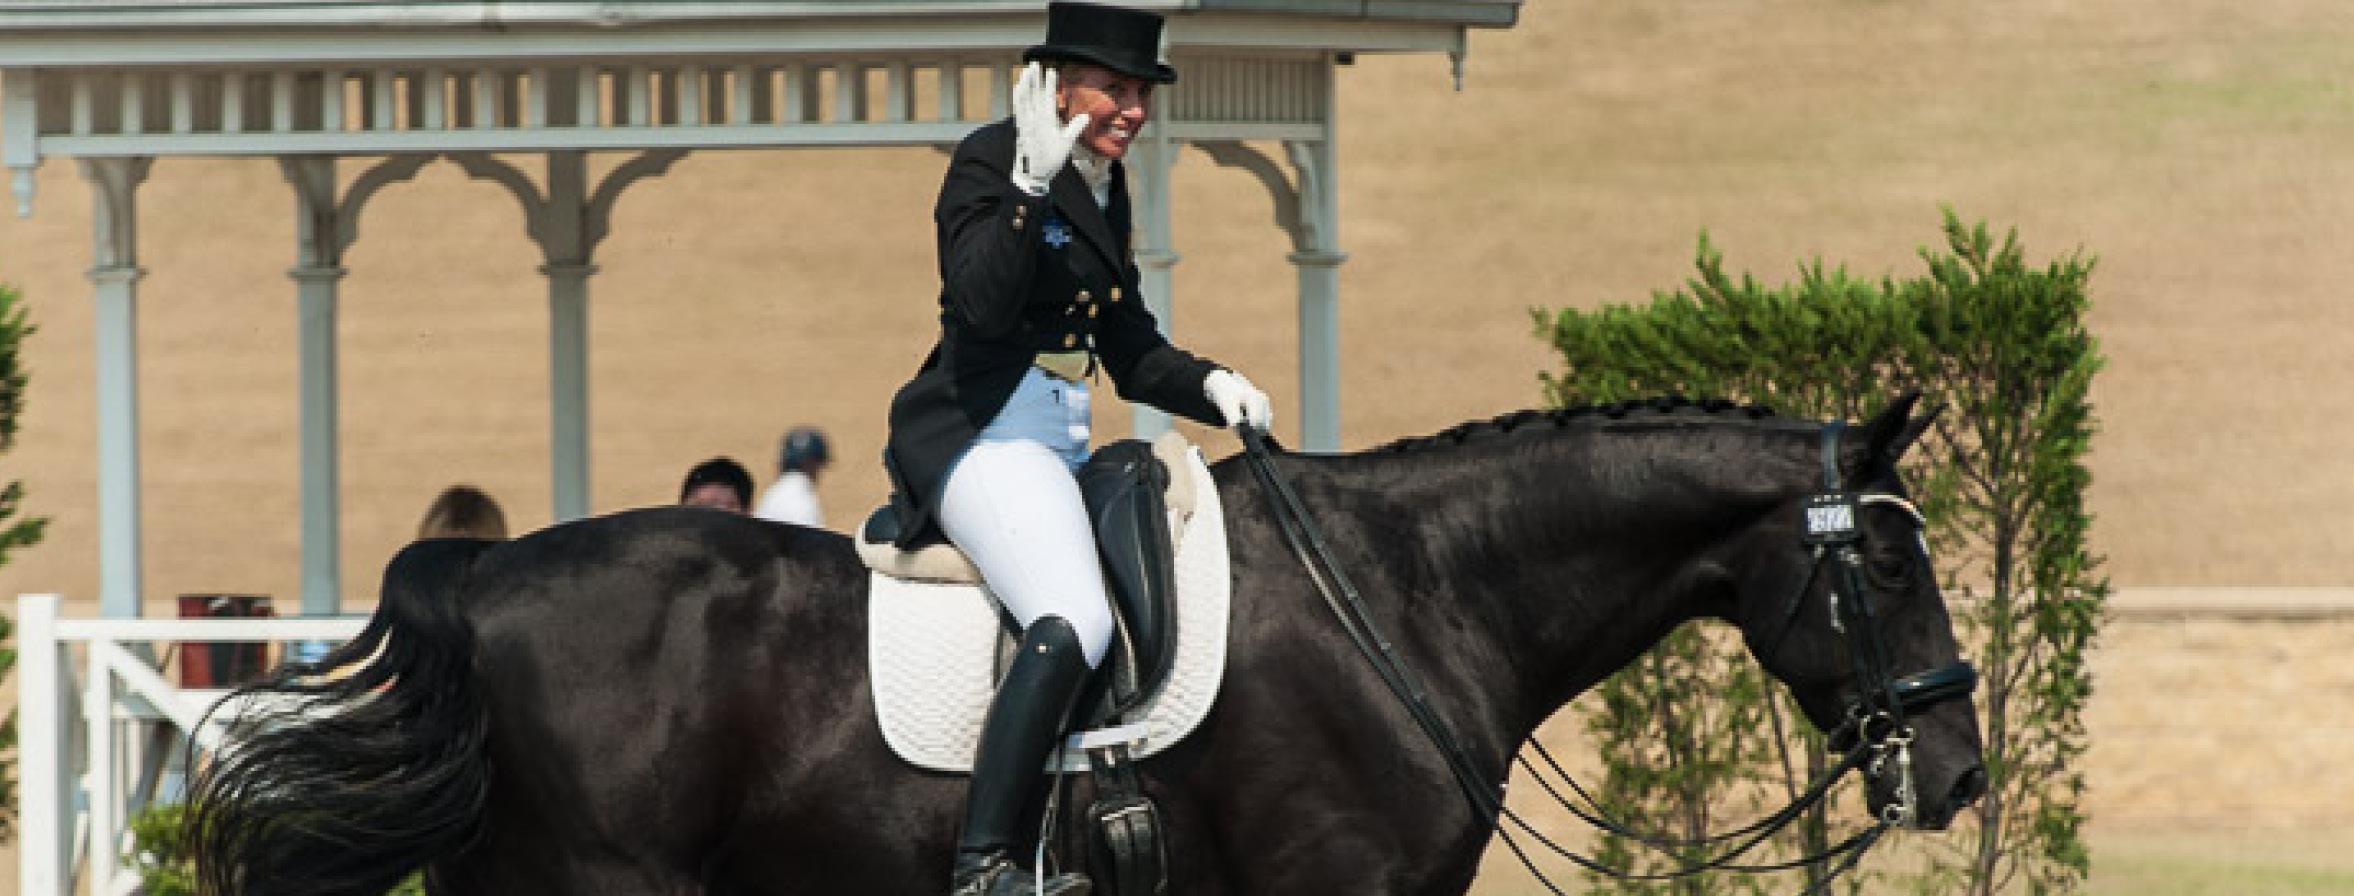 Annual Reports | Equestrian New South Wales